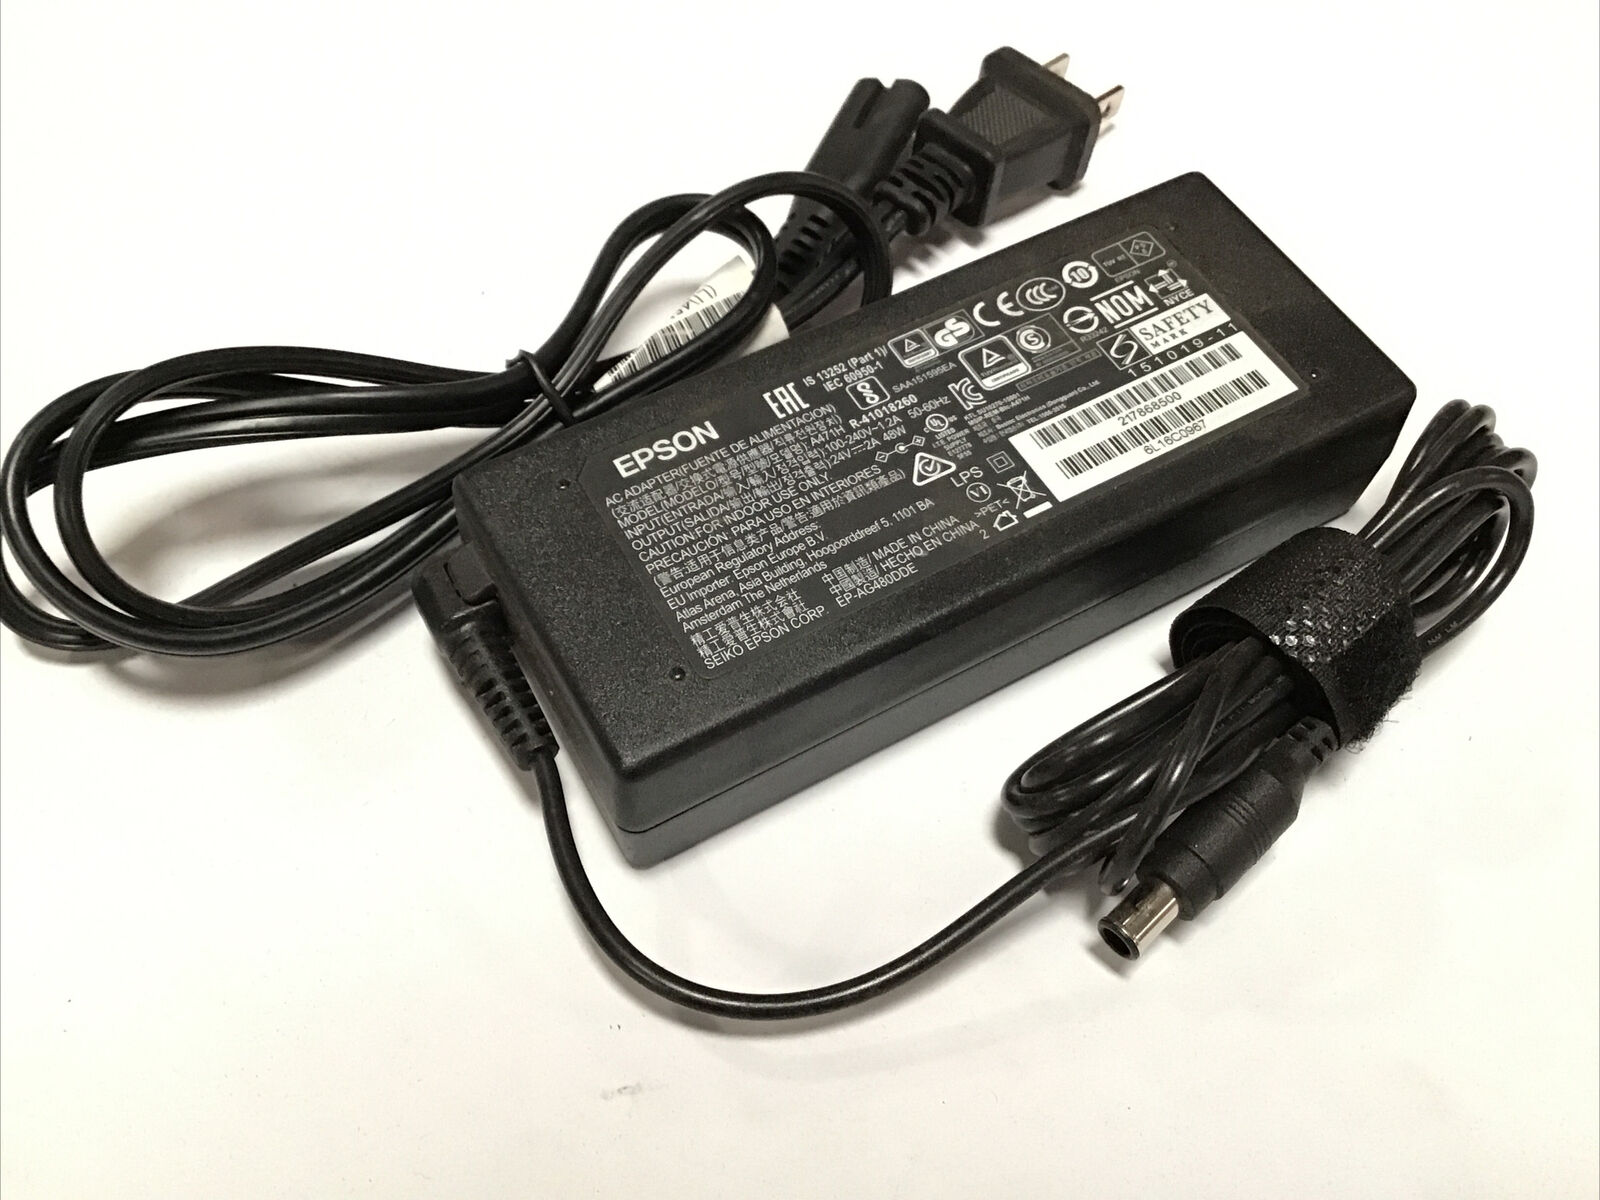 Epson A471H 24V 2A 48W Power Supply Adapter for Document Scanner